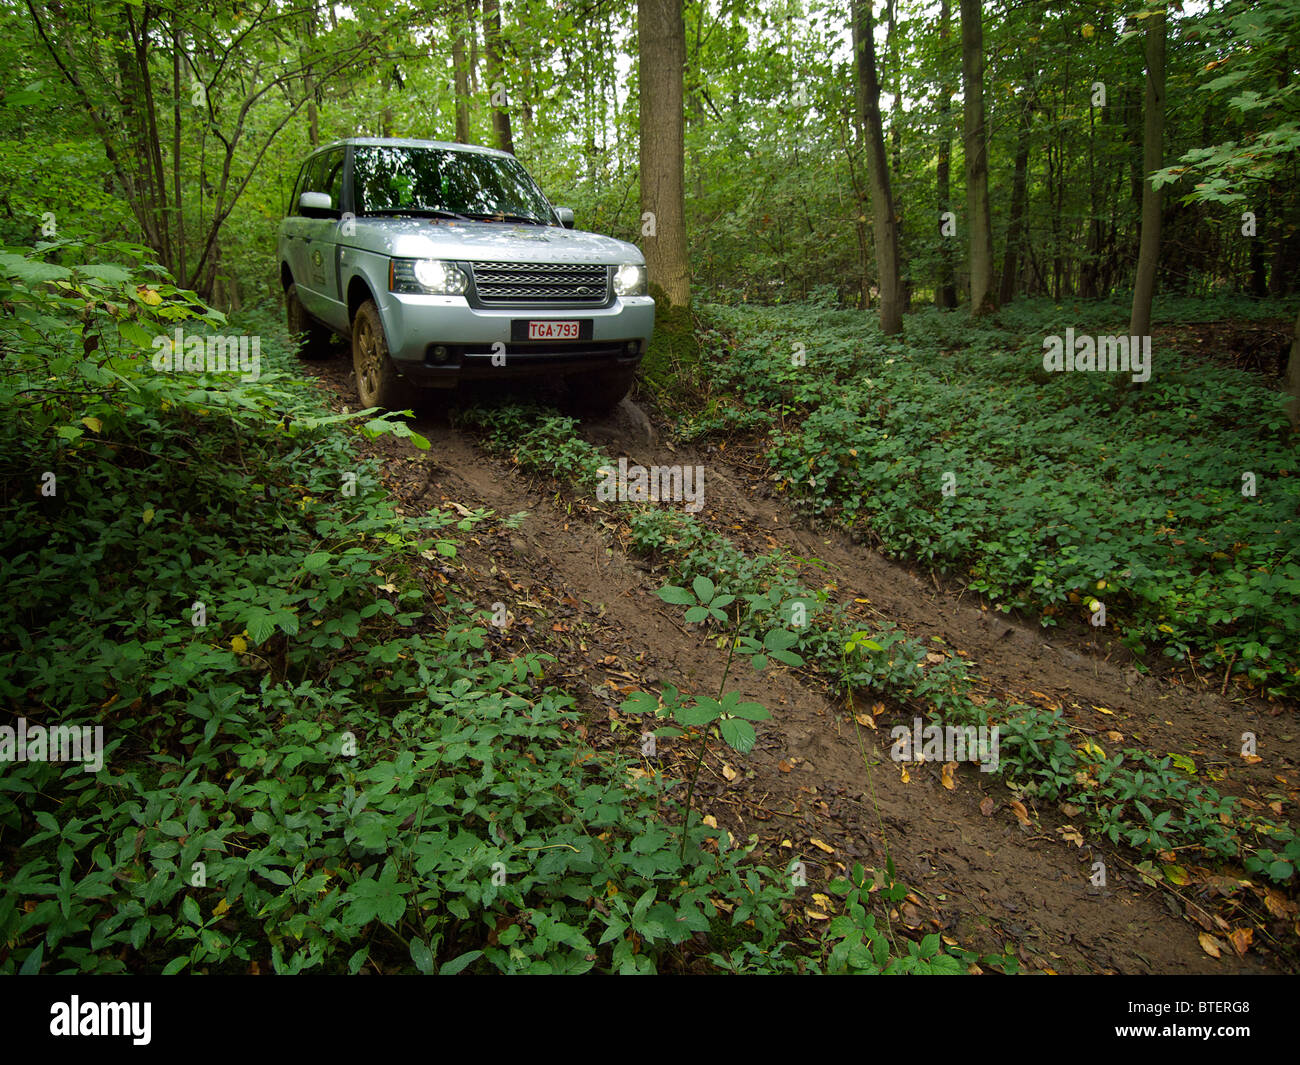 Range Rover vogue driving along a very muddy path in the forest at Domaine d'Arthey estate, Belgium Stock Photo